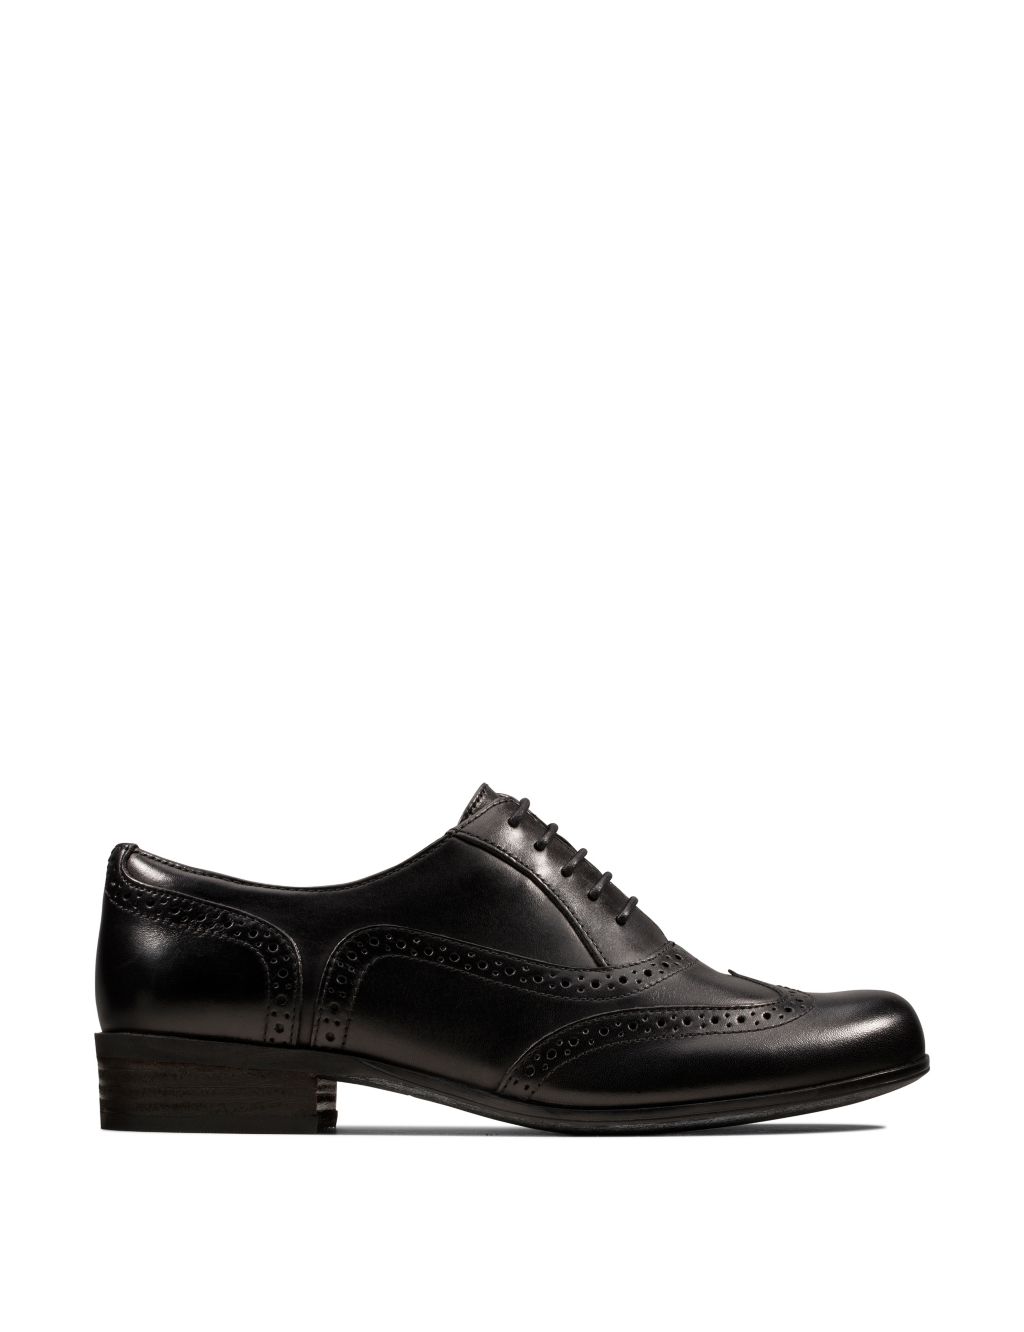 Wide Fit Leather Flat Brogues image 1